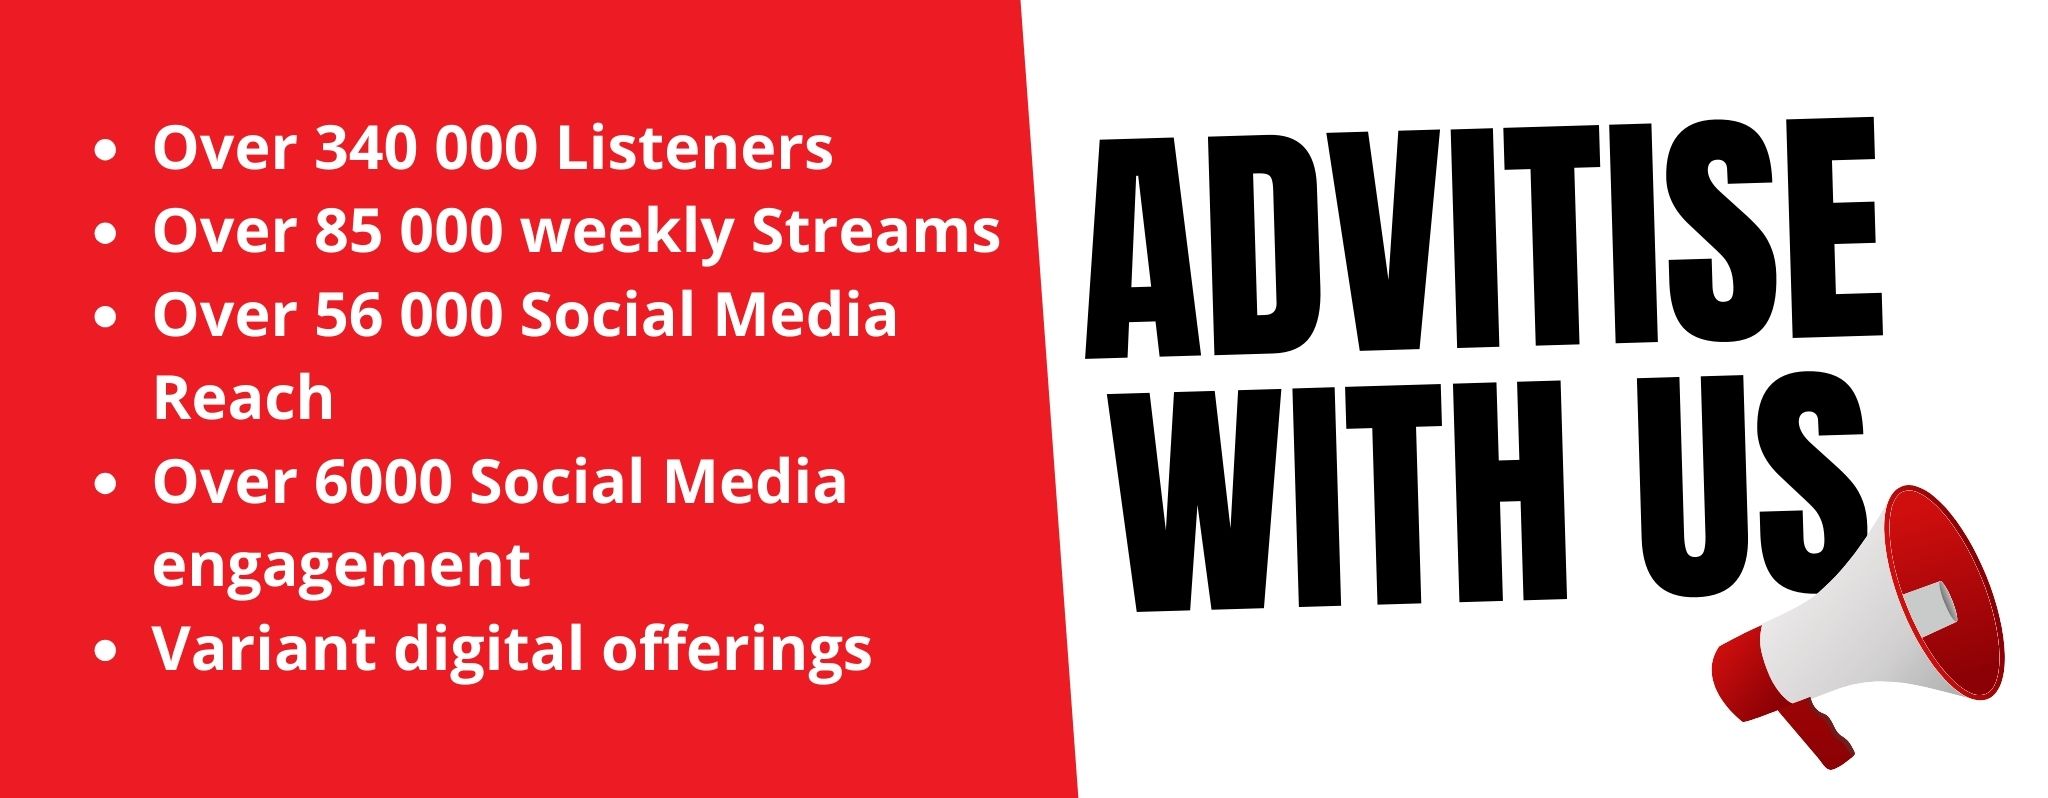 Advertise with us - Website Slide